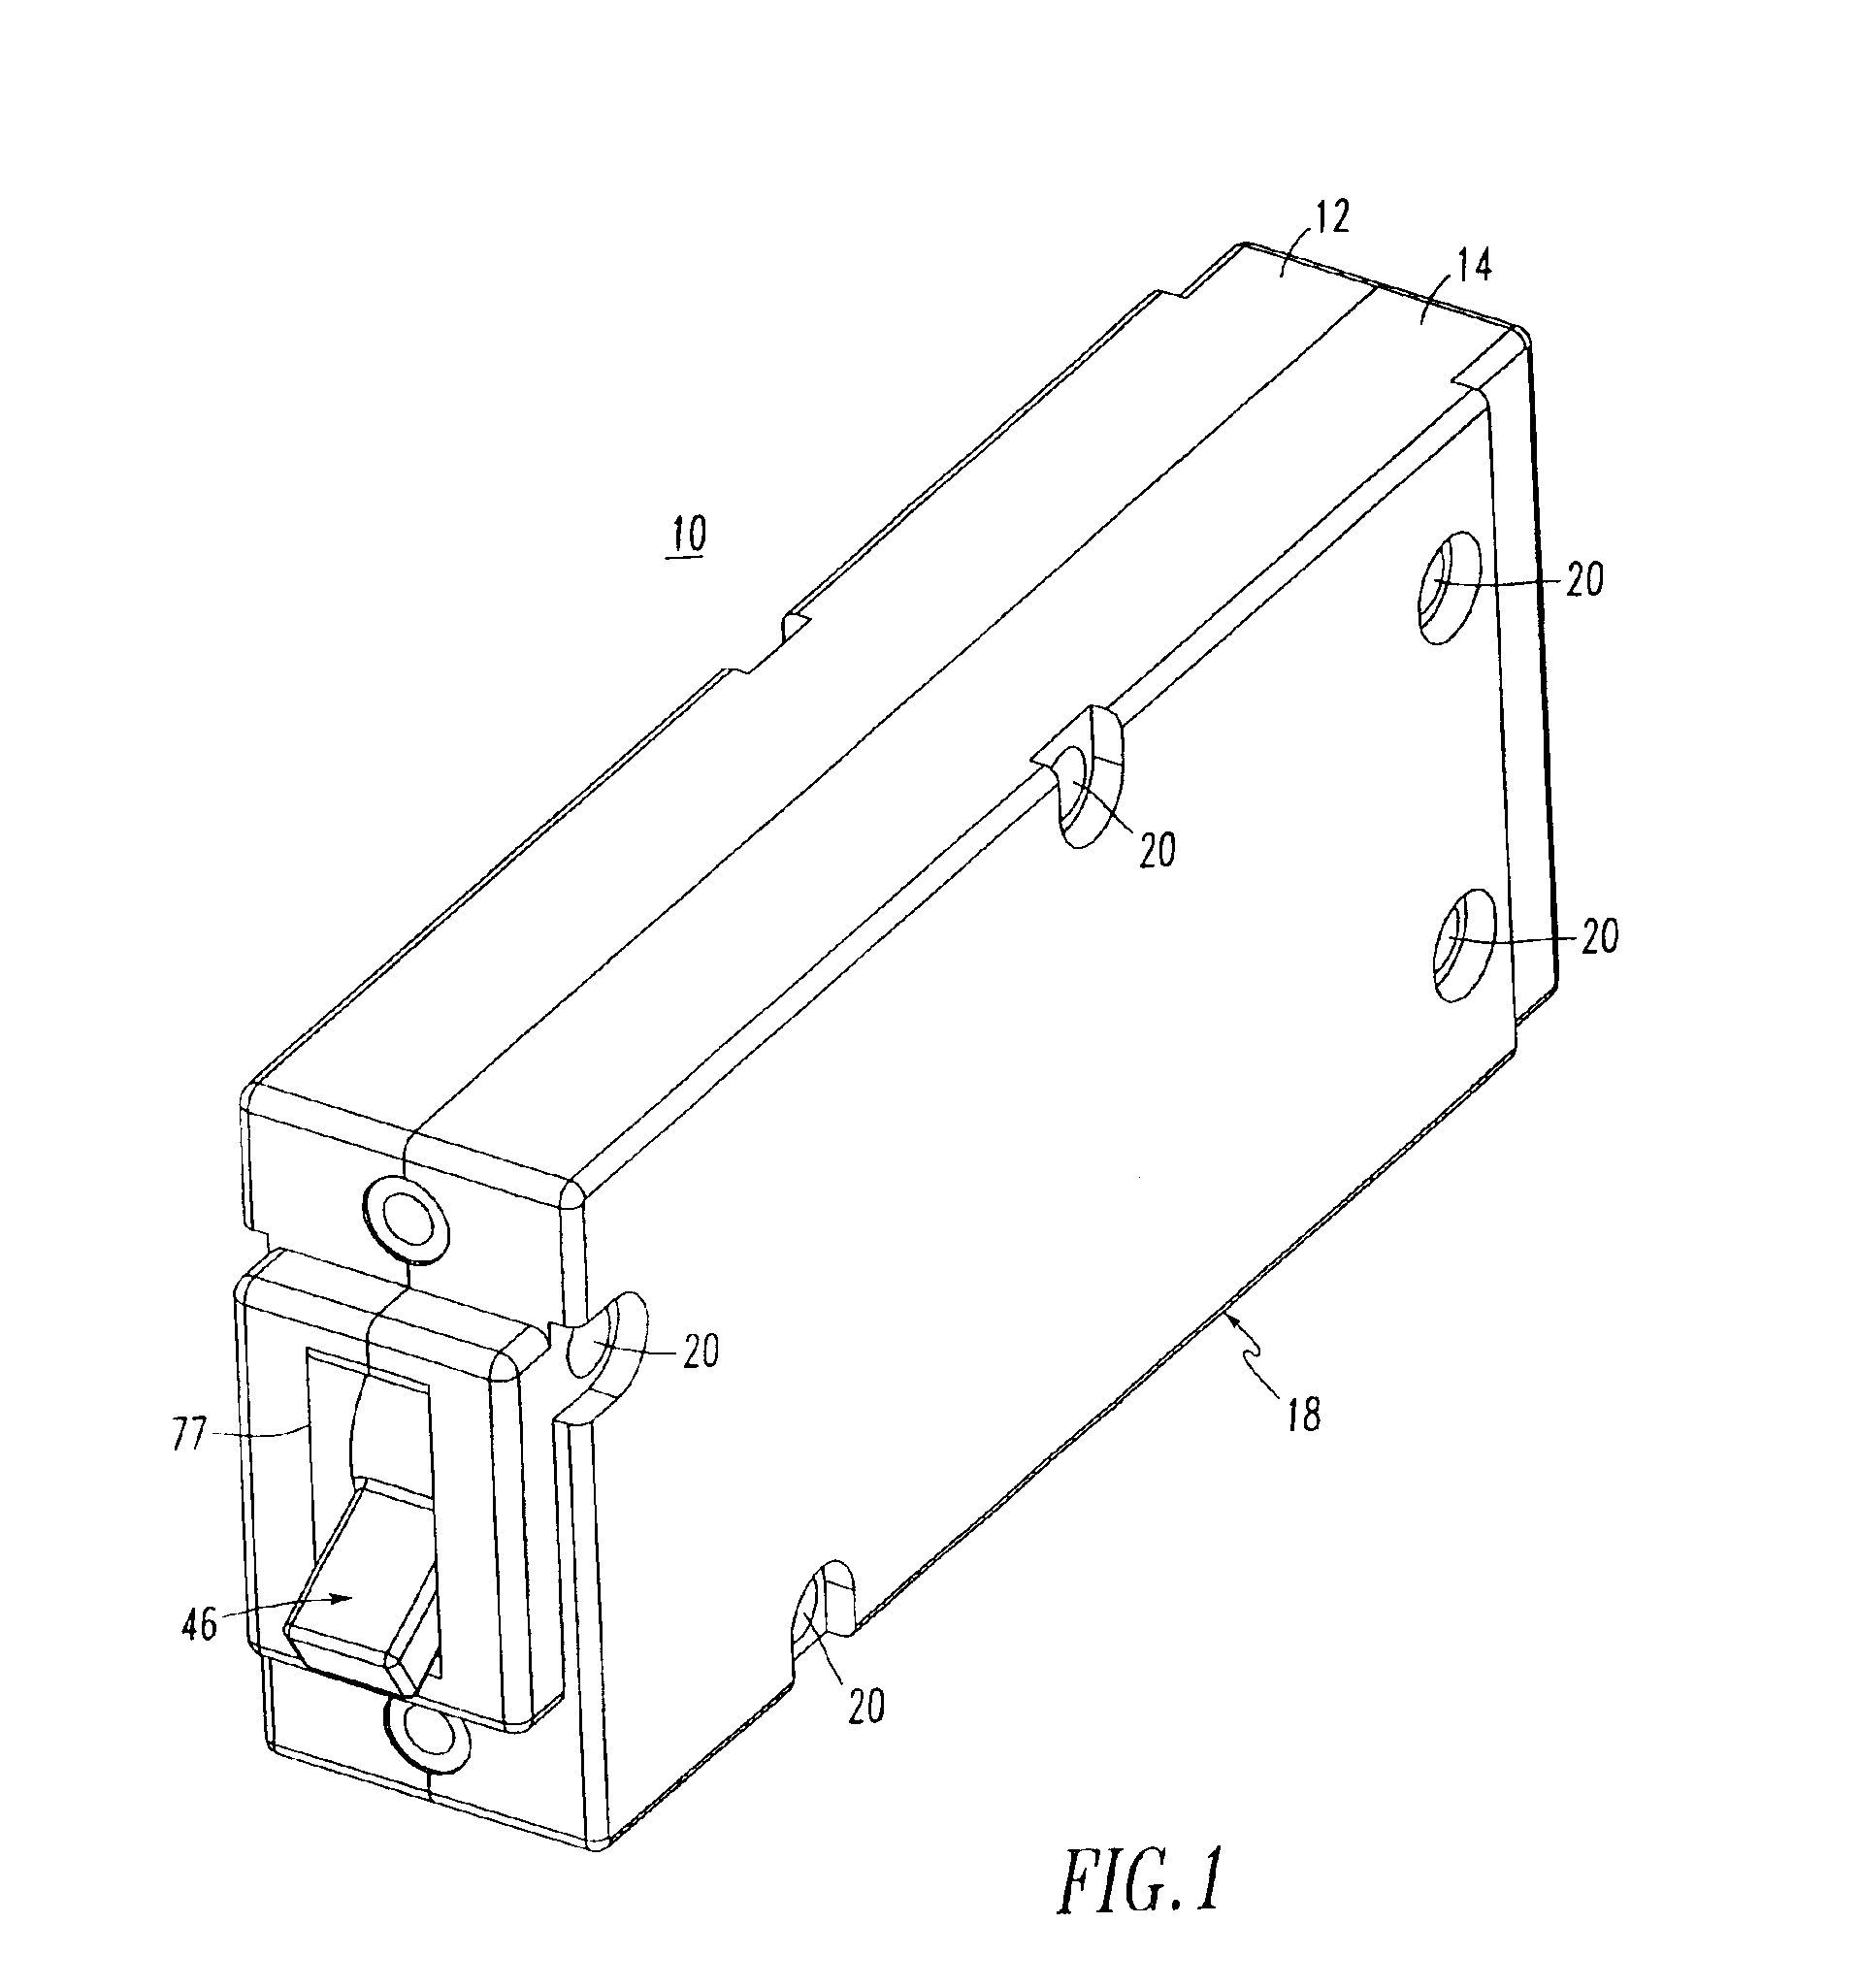 Circuit breaker including operating handle having one or more operating arms and extension springs